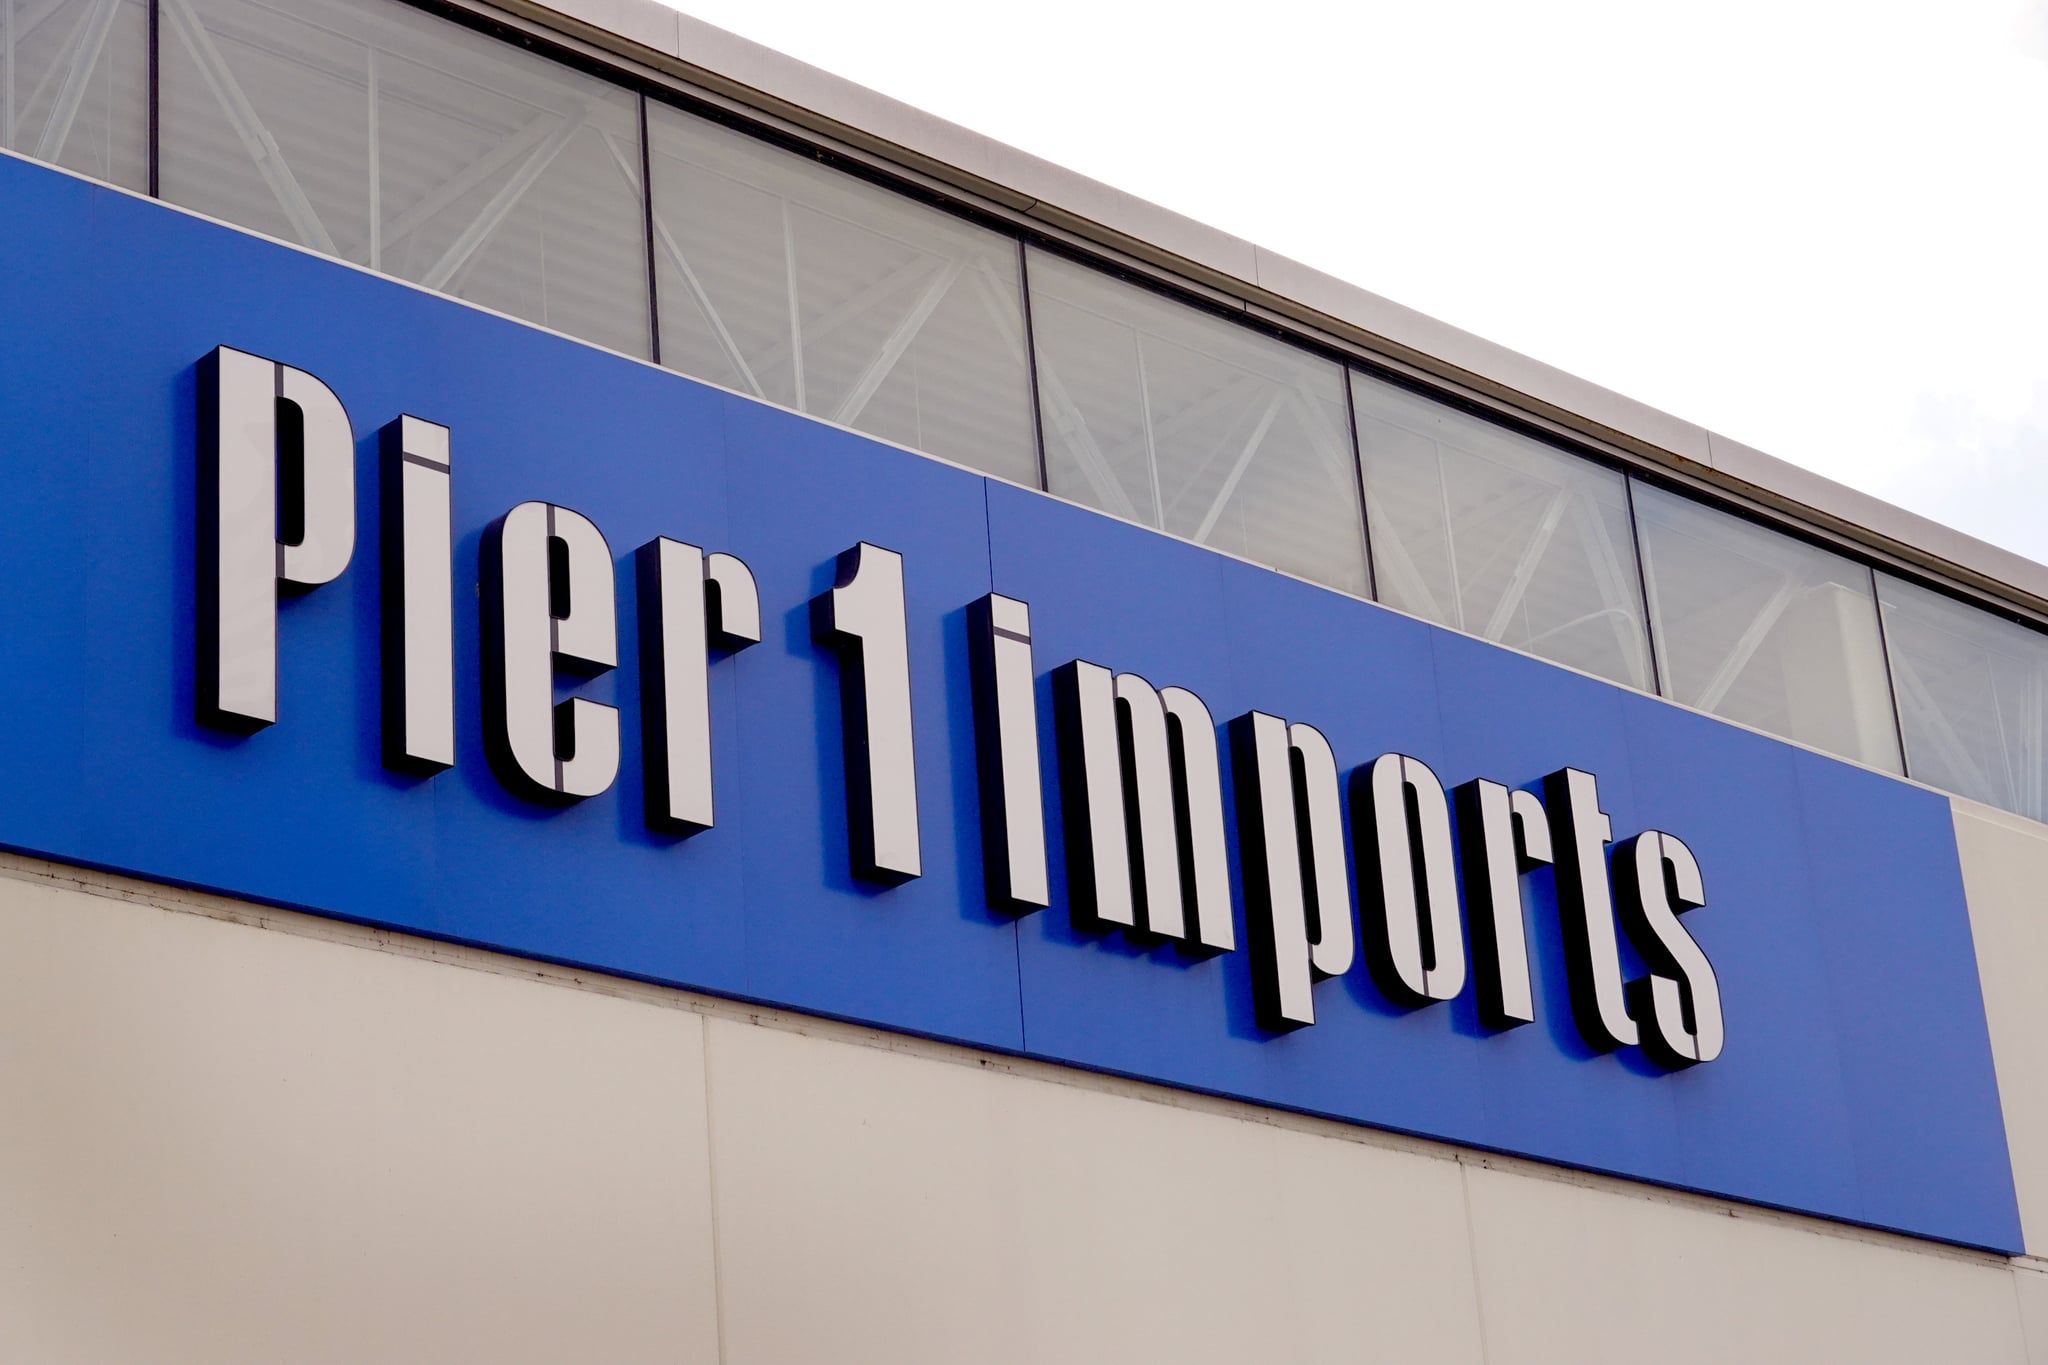 CHICAGO, ILLINOIS - FEBRUARY 18: A sign hangs above a Pier 1 imports store that is slated to close on February 18, 2020 in Chicago, Illinois. The struggling retailer announced today that it had filed for bankruptcy and was closing 450 stores.  (Photo by Scott Olson/Getty Images)